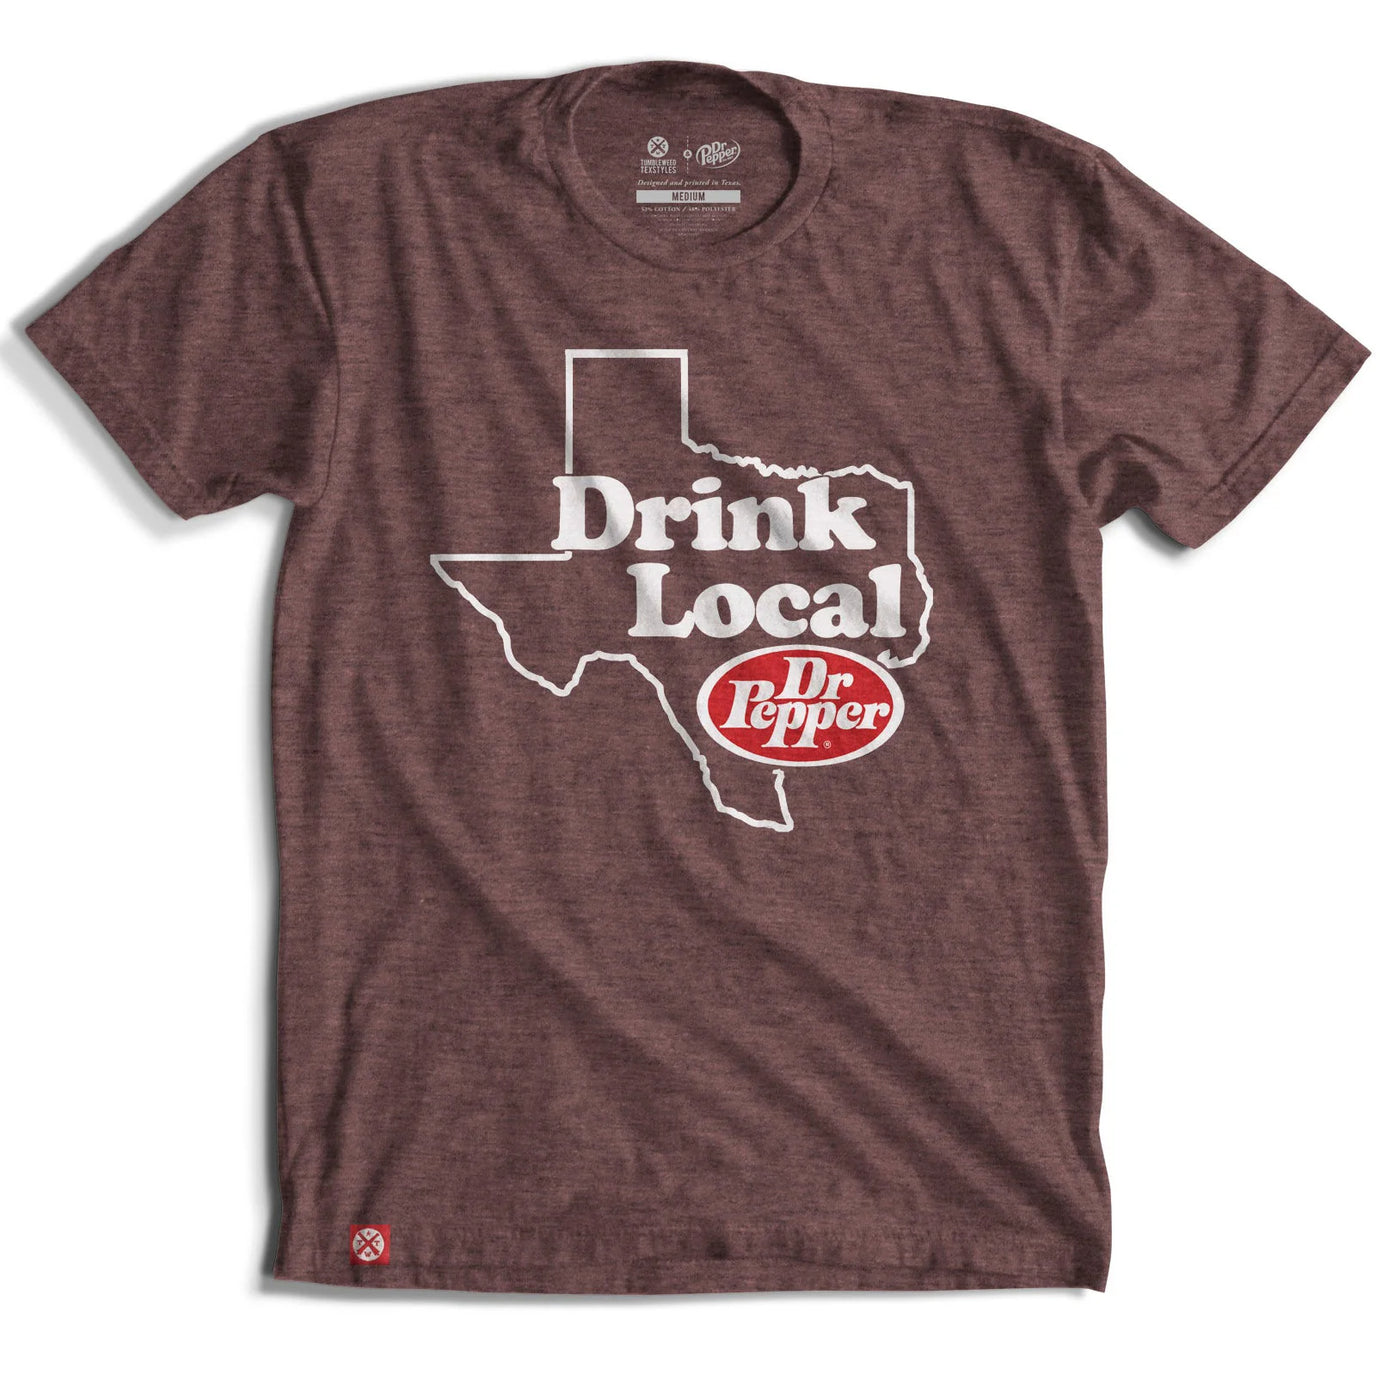 Tumbleweed Texstyles Drink Local Dr. Pepper Maroon Graphic